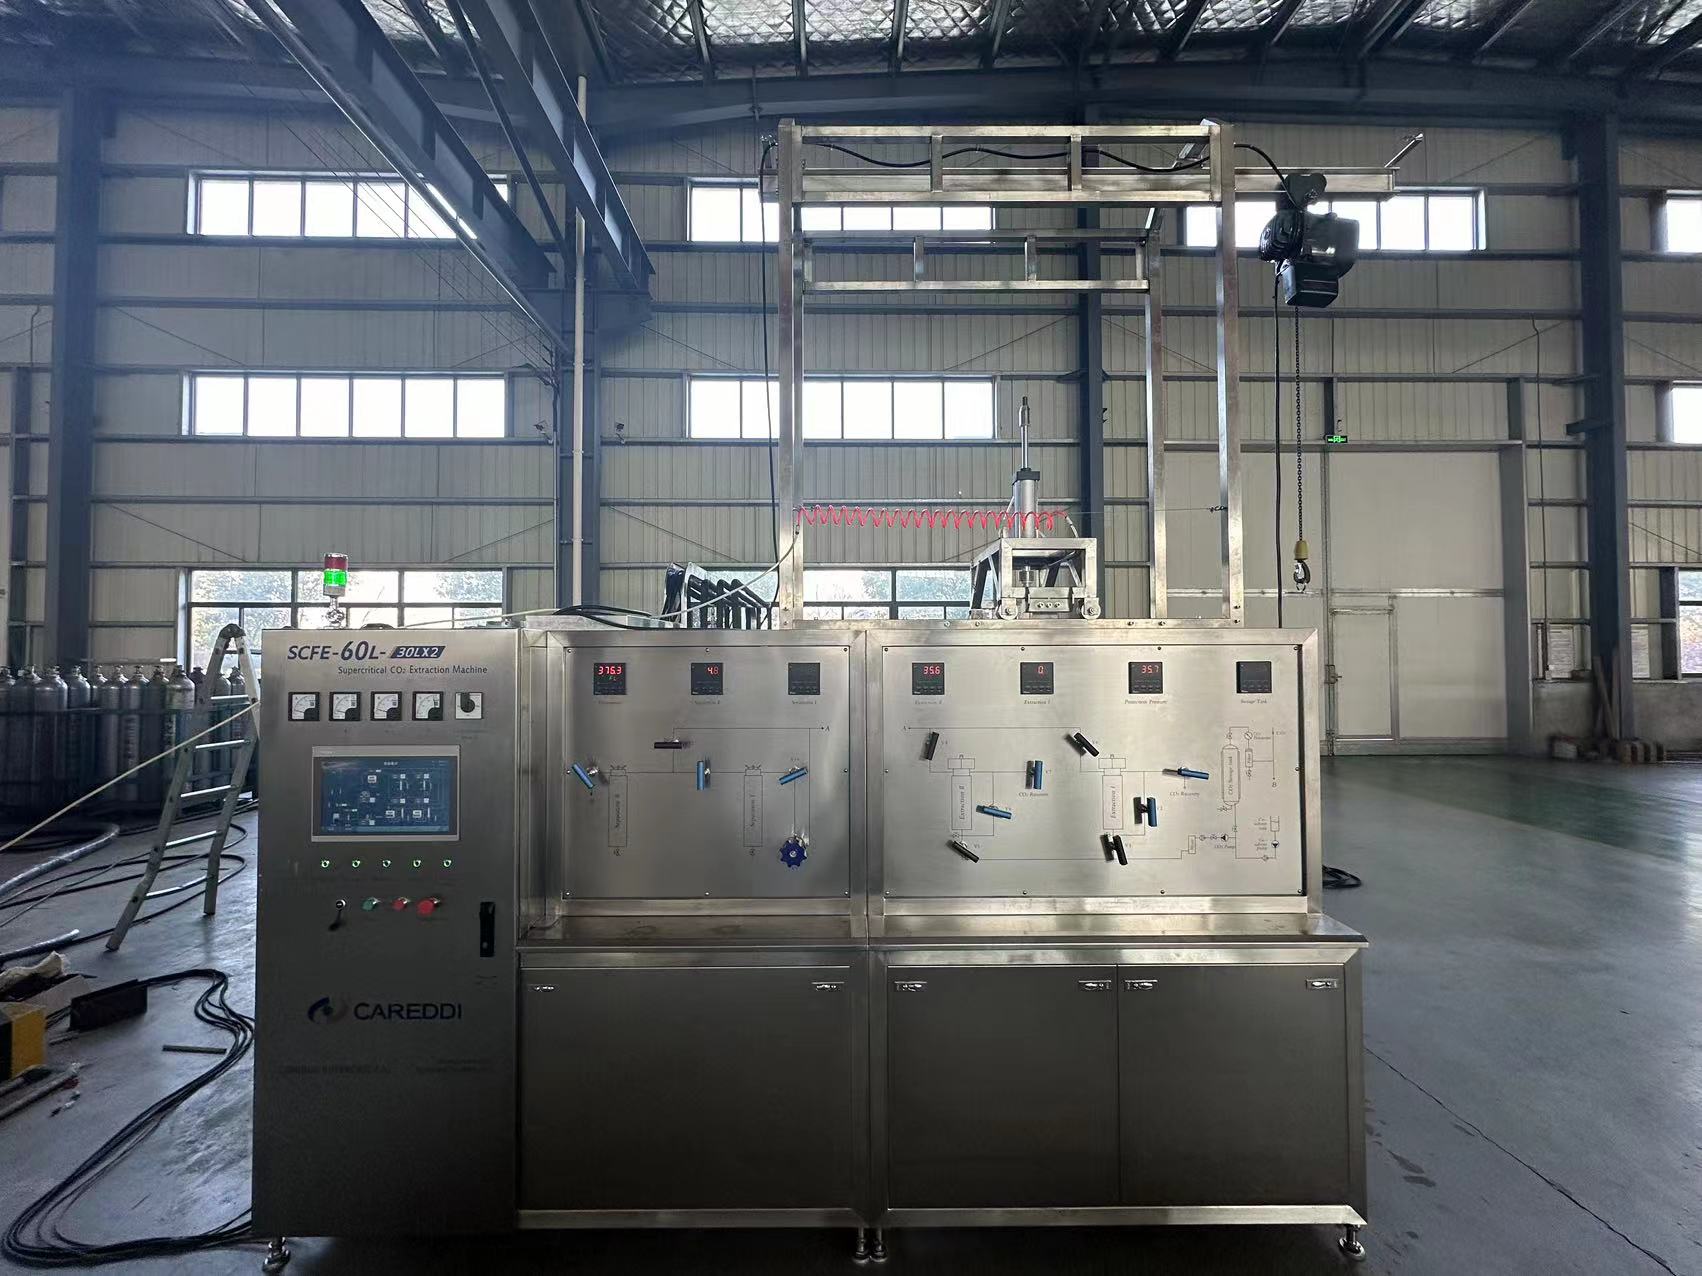 Careddi Supercritical Successfully Ships Complete 60L (30Lx2) Supercritical CO2 Extraction Line To Morocco